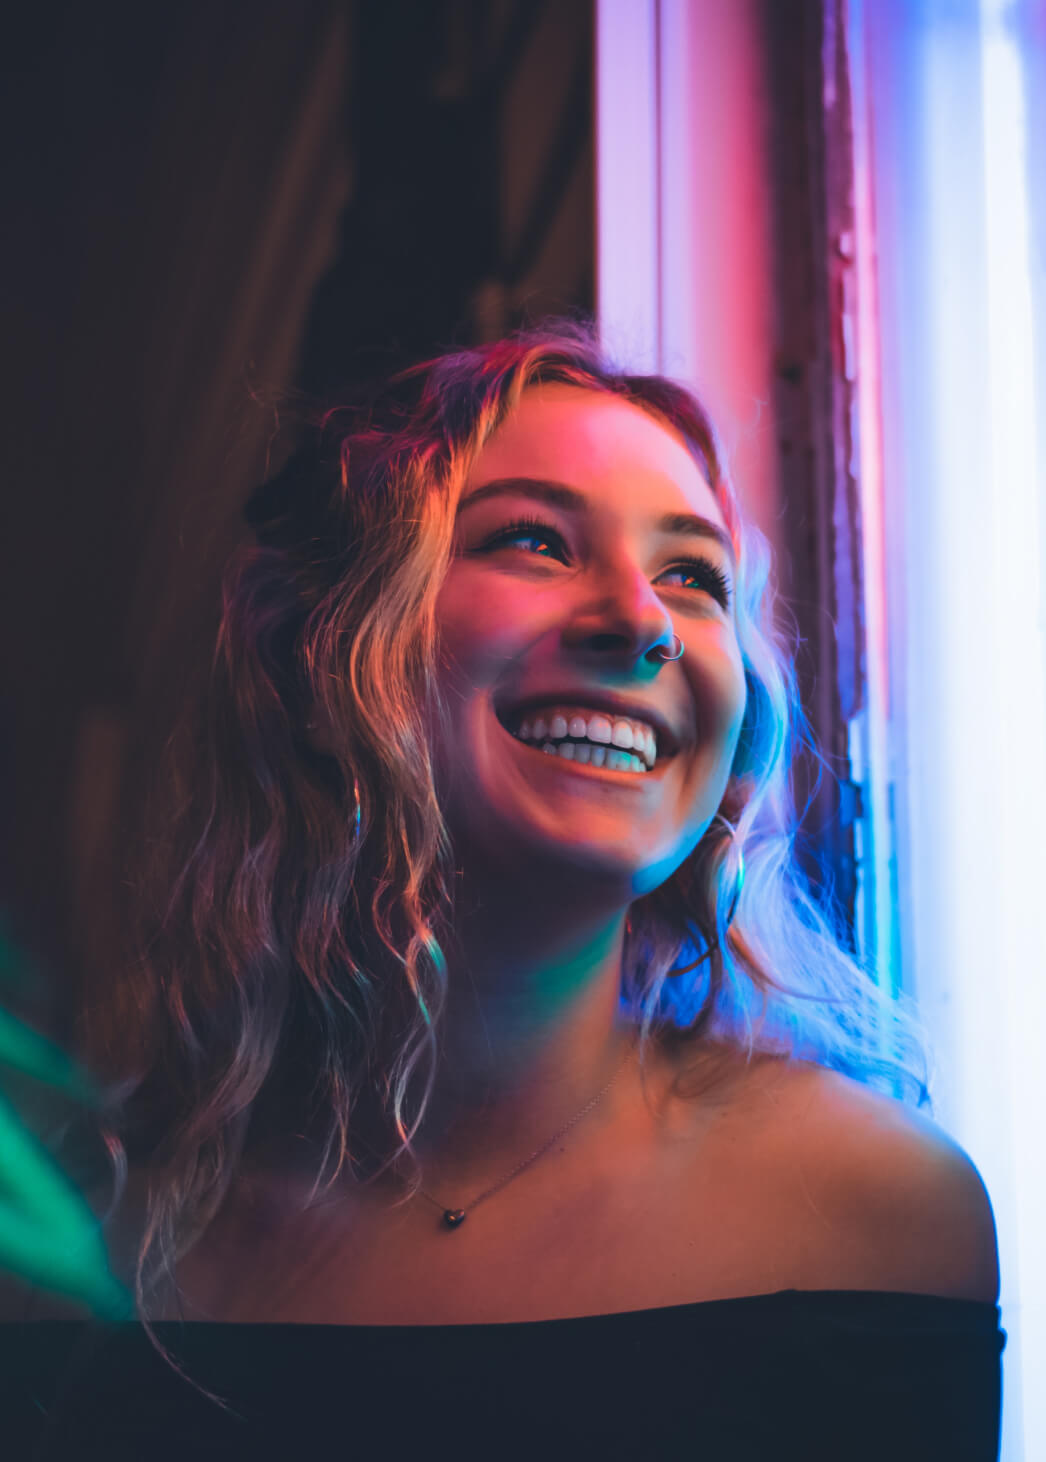 Young blonde woman smiles happily looking out a window with neon lighting bouncing off her